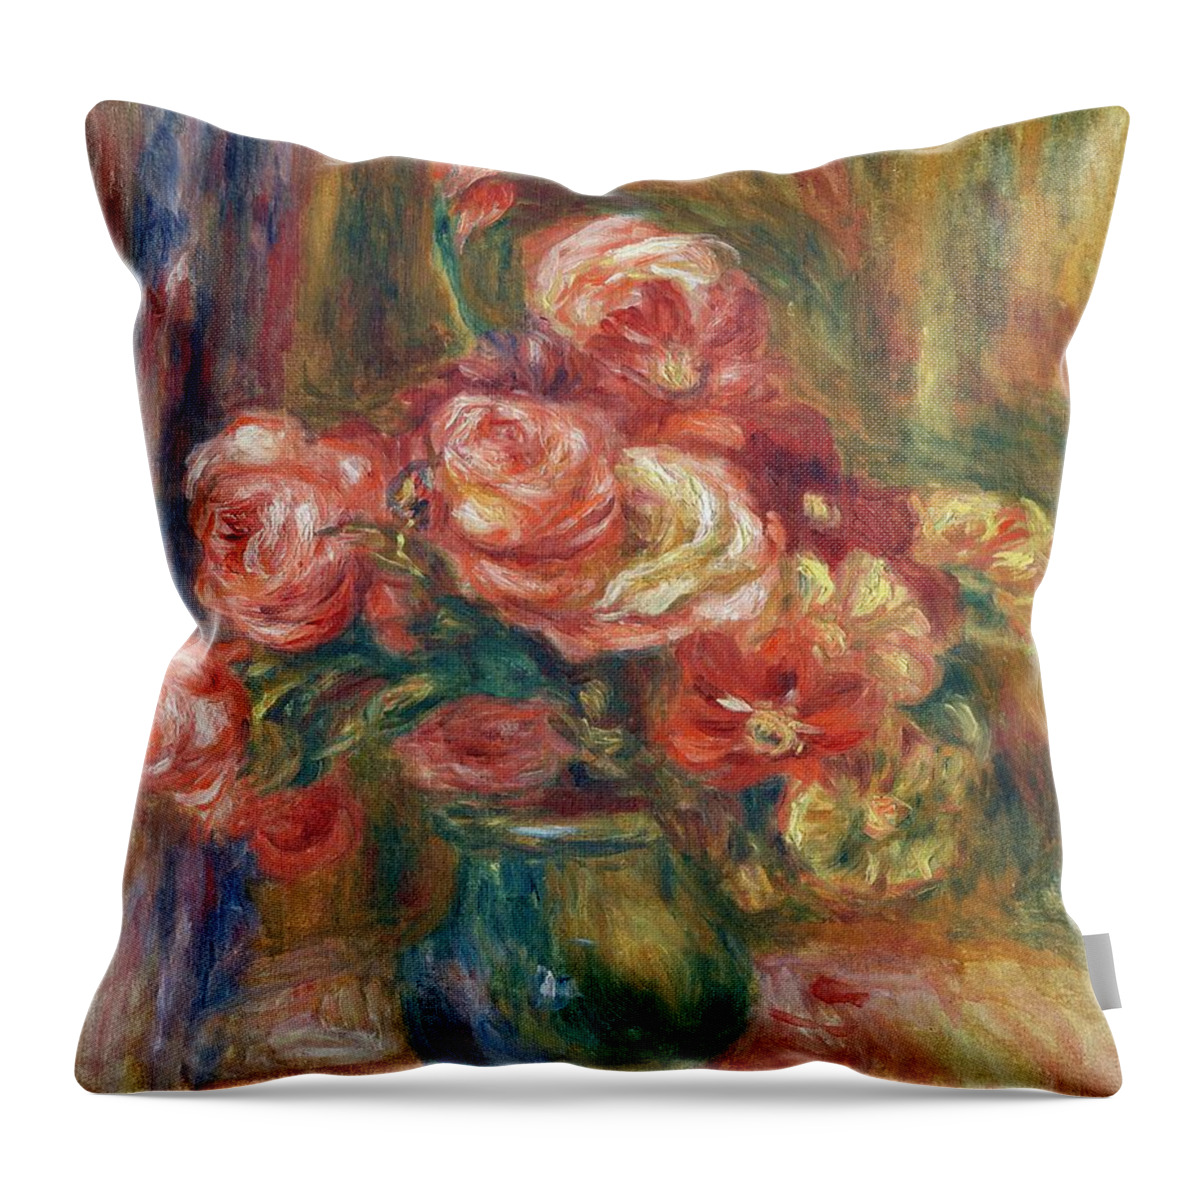 Impressionism Throw Pillow featuring the painting Vase Of Roses by Pierre-auguste Renoir